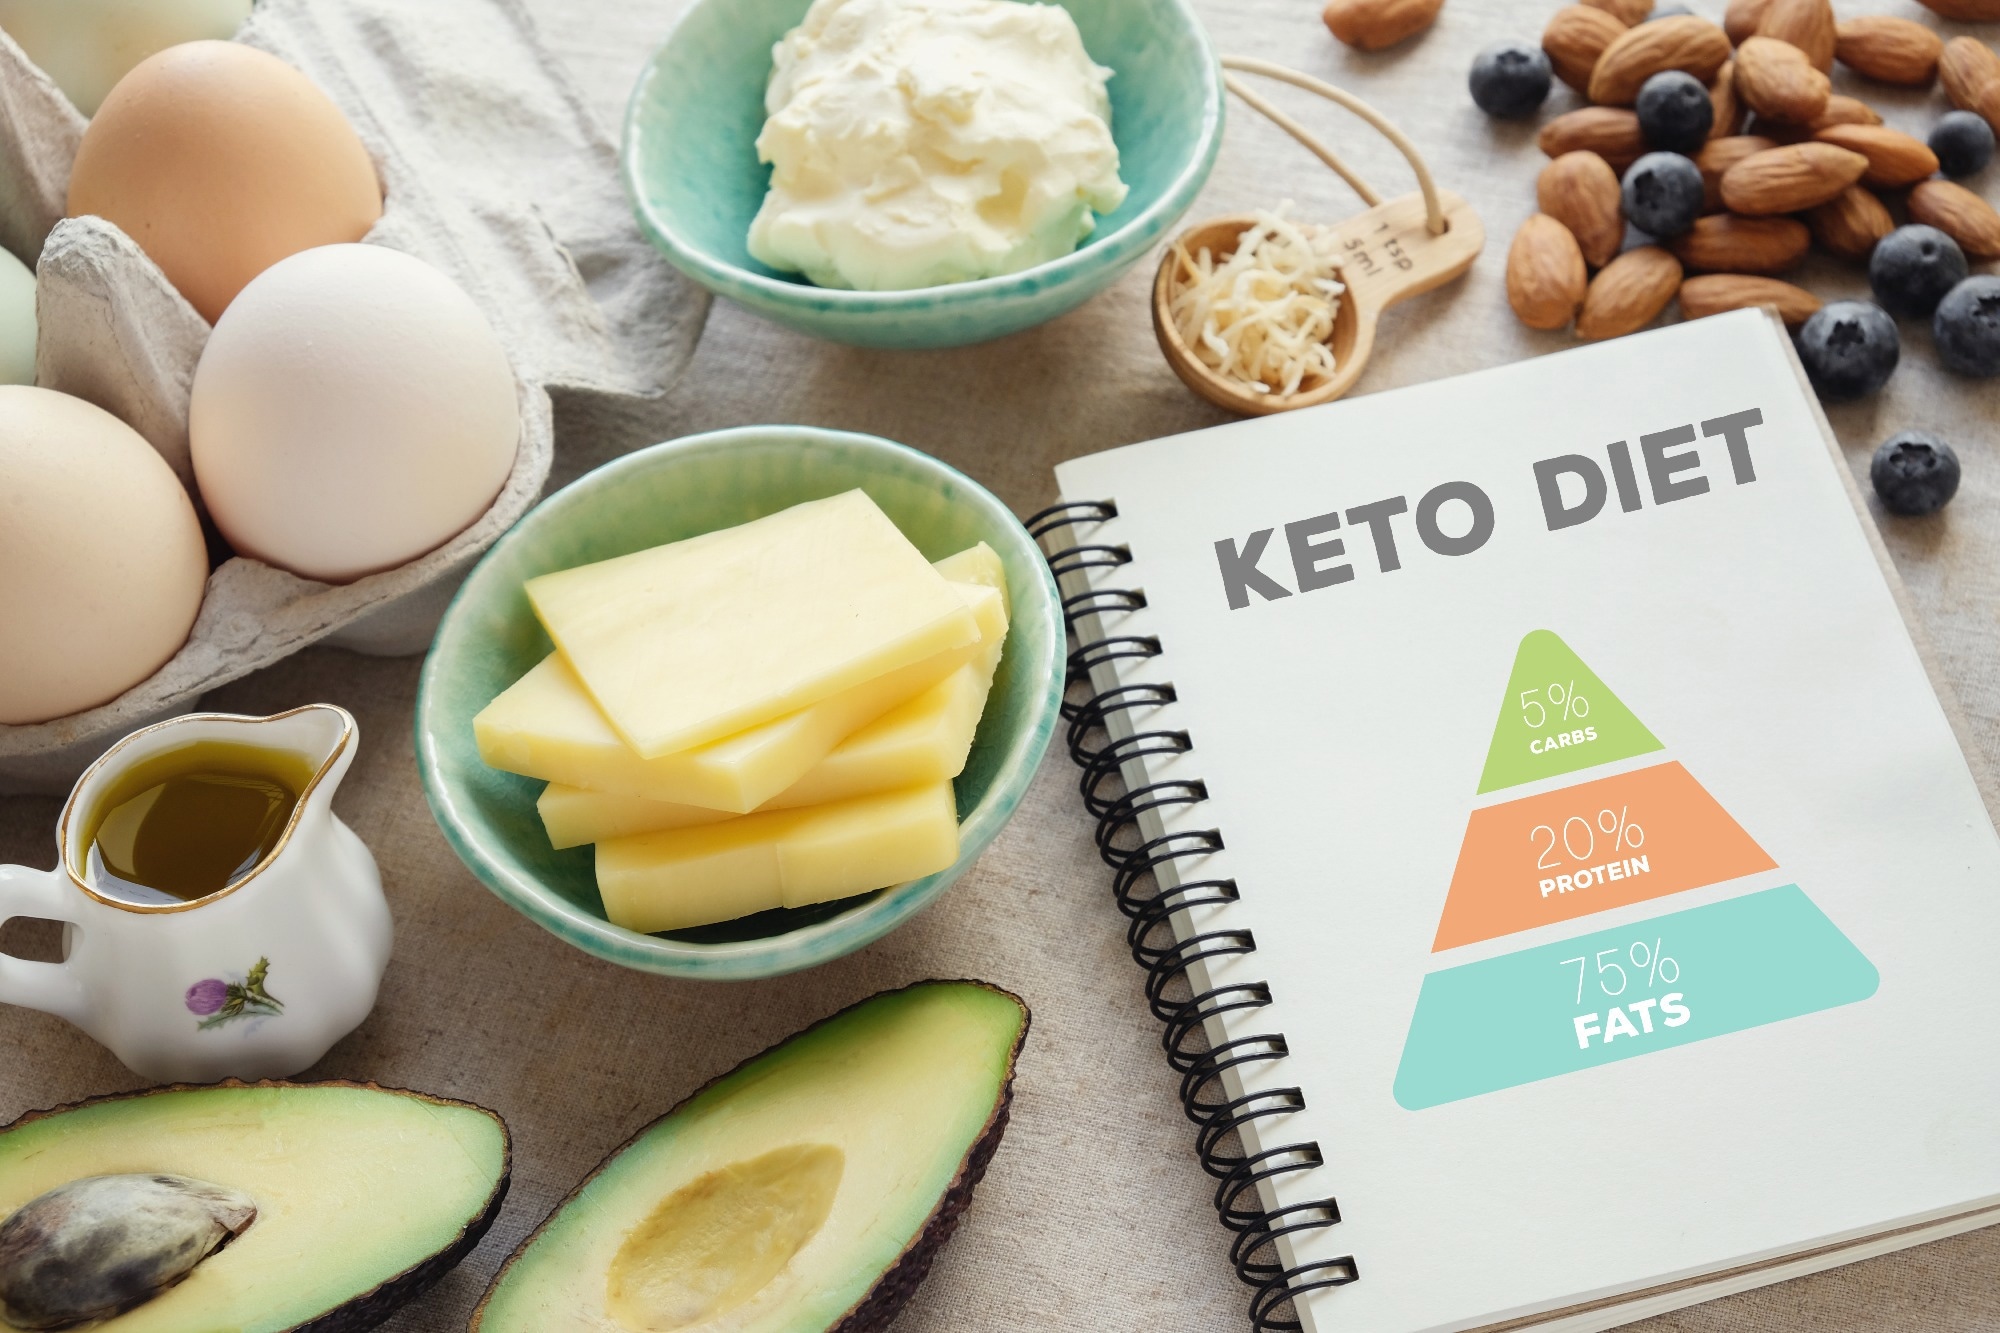 Study: A ketogenic diet substantially reshapes the human metabolome. Image Credit: SewCreamStudio/Shutterstock.com